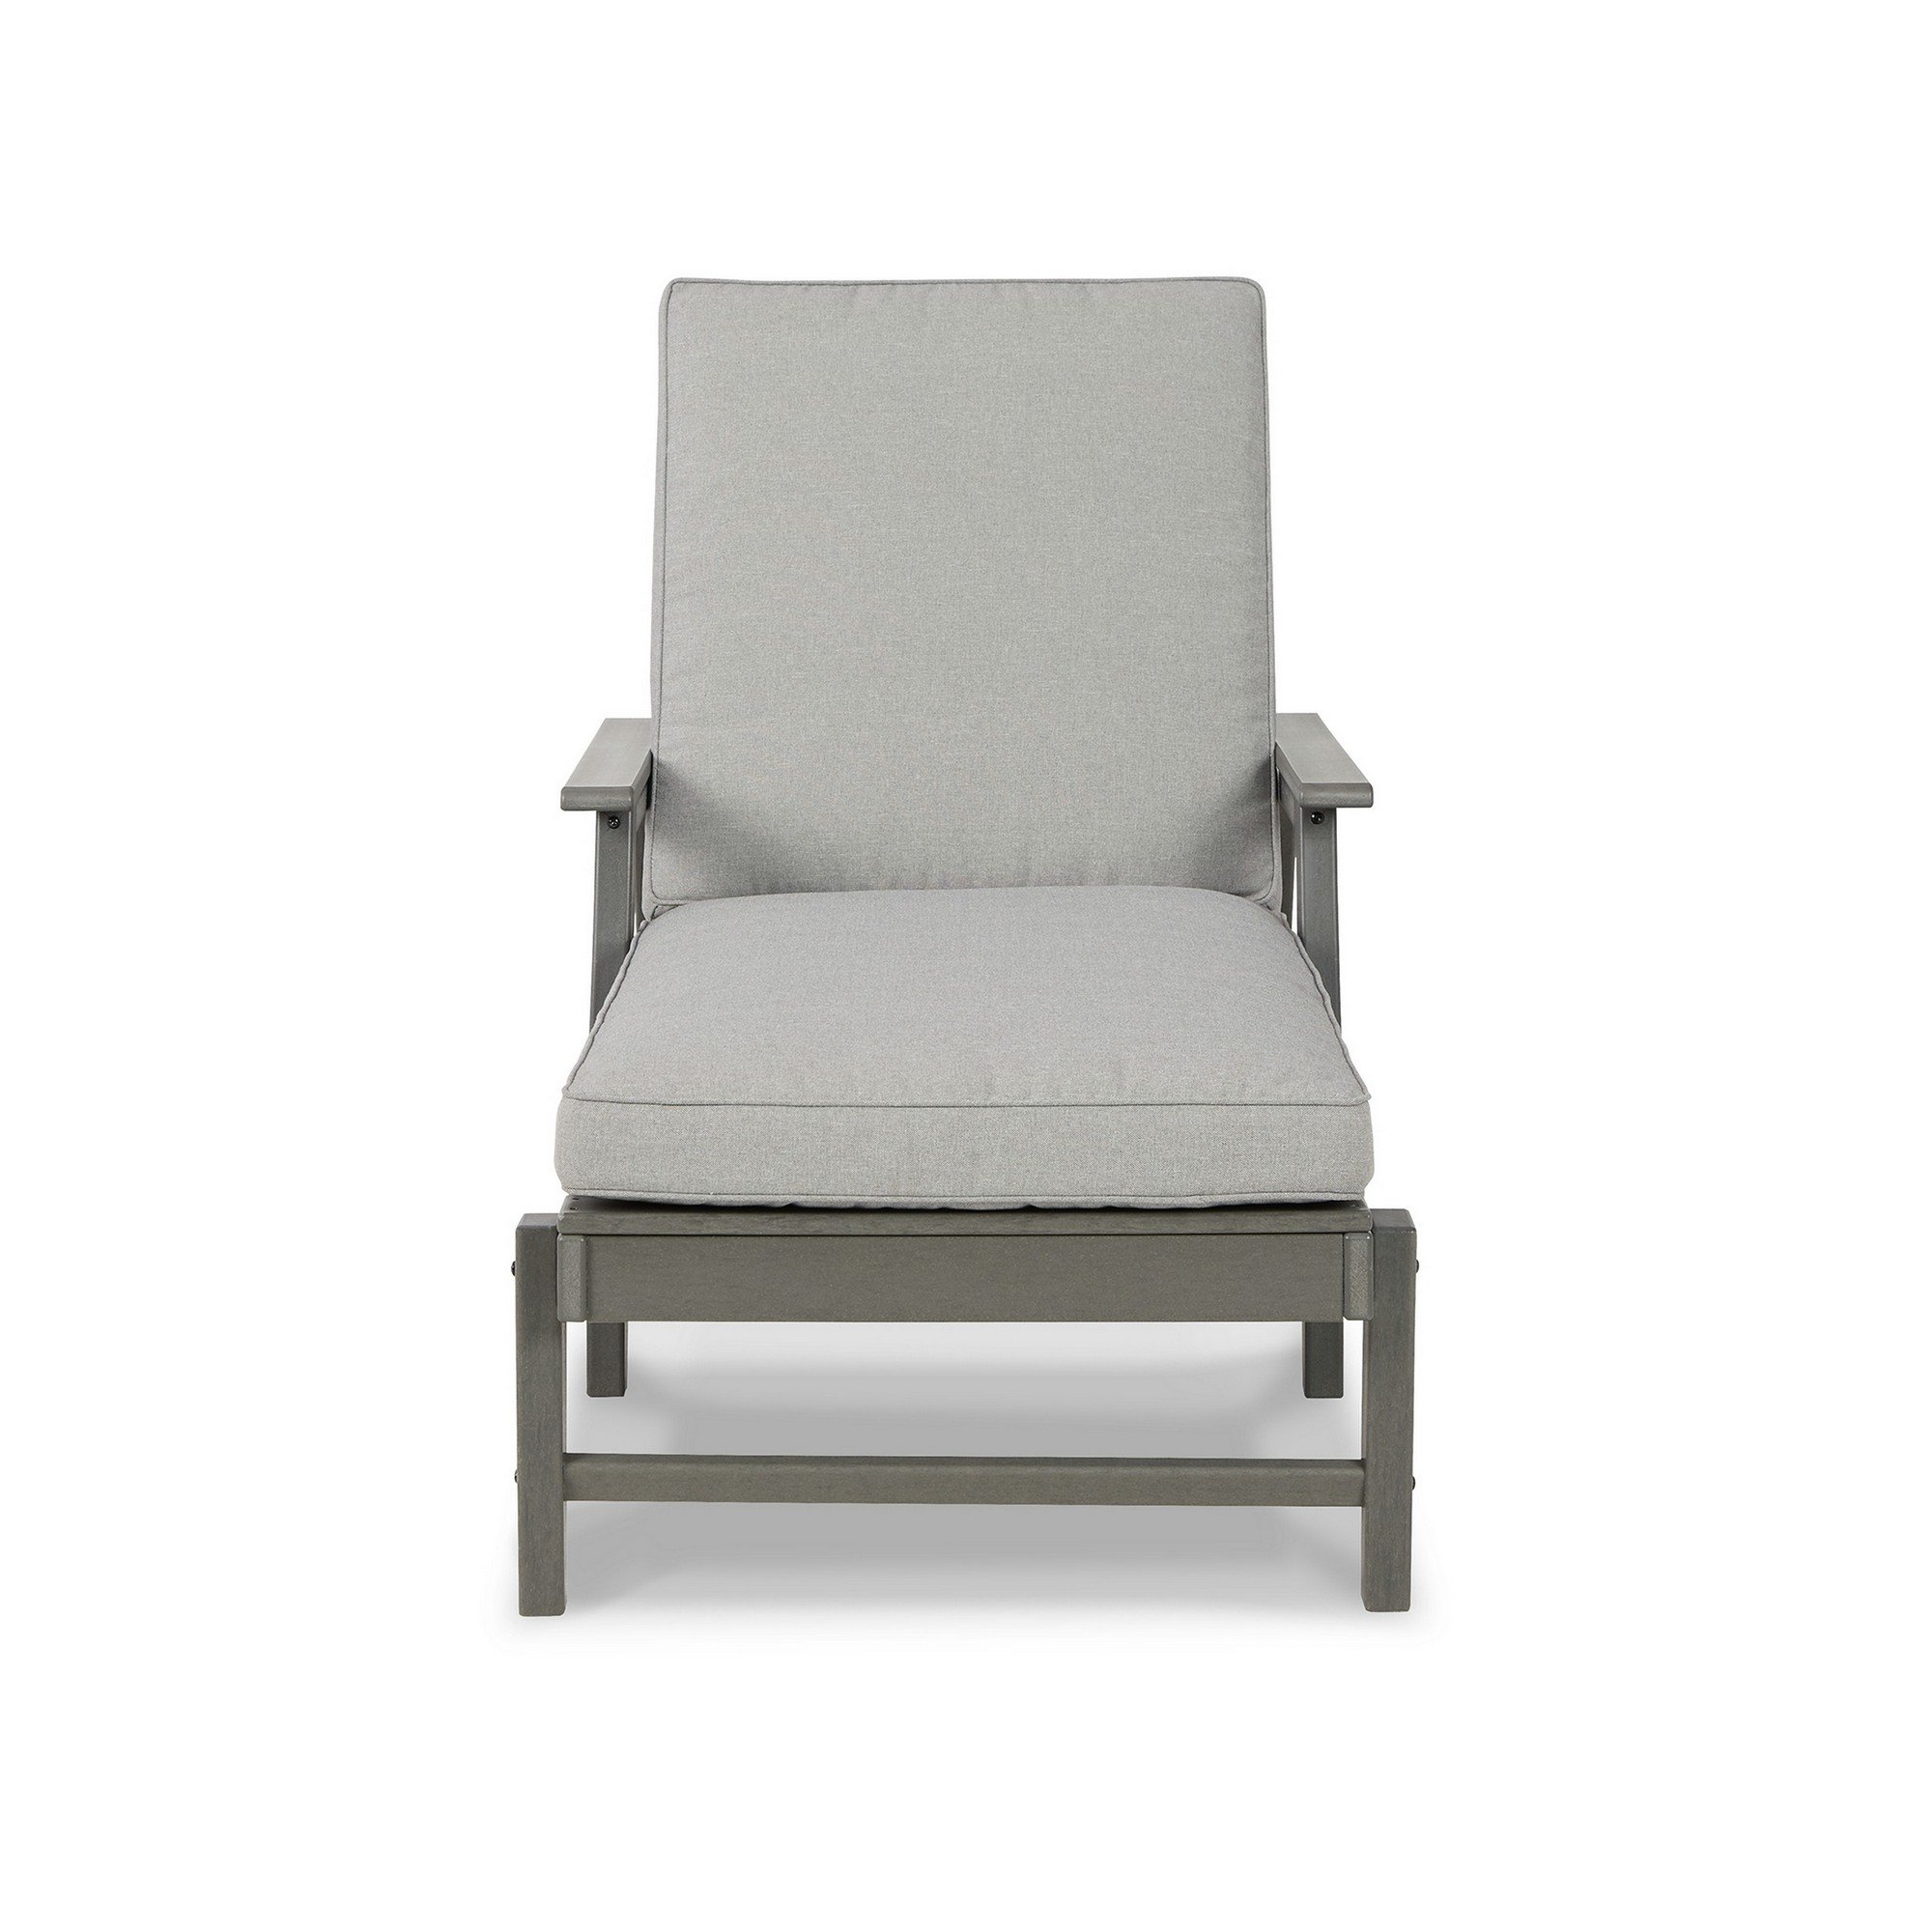 Vrai 78 Inch Adjustable Outdoor Chaise Lounge, Gray Frame, Cushioned Seat